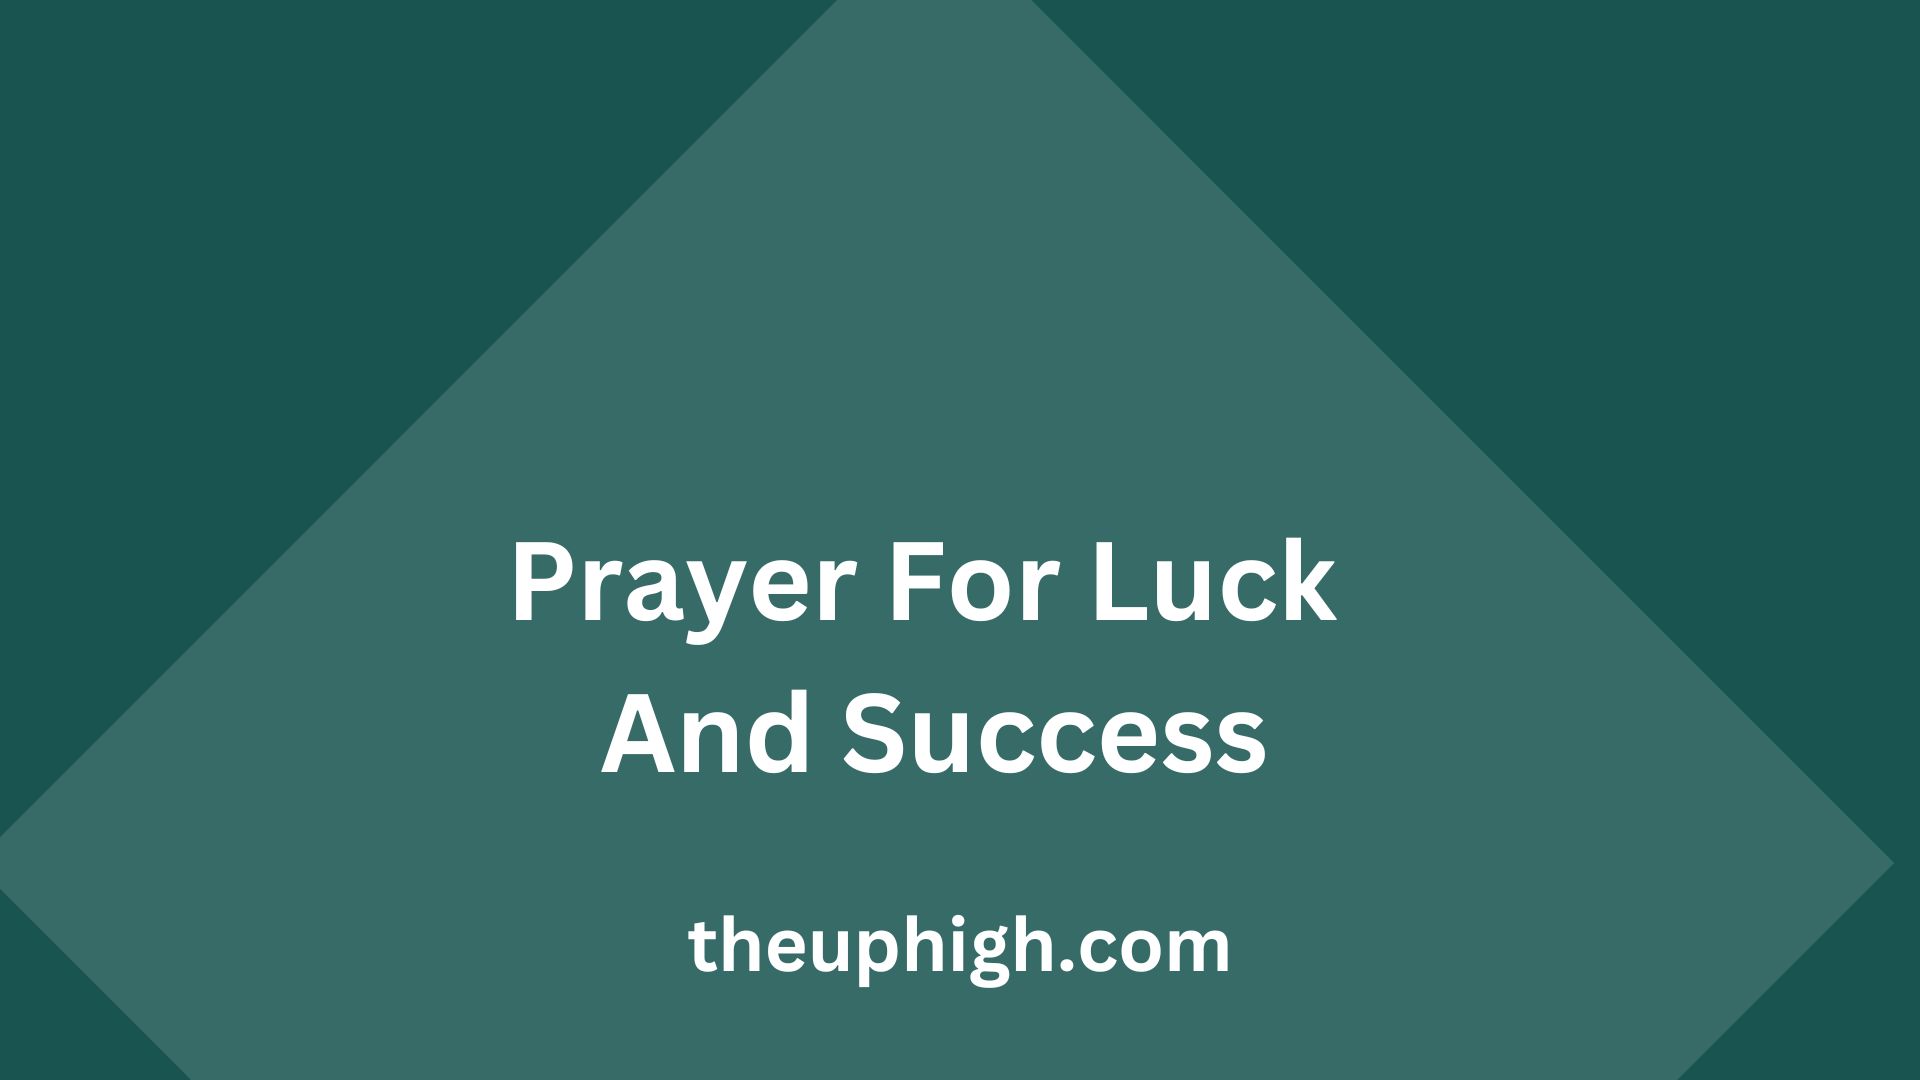 Prayer For Luck And Success